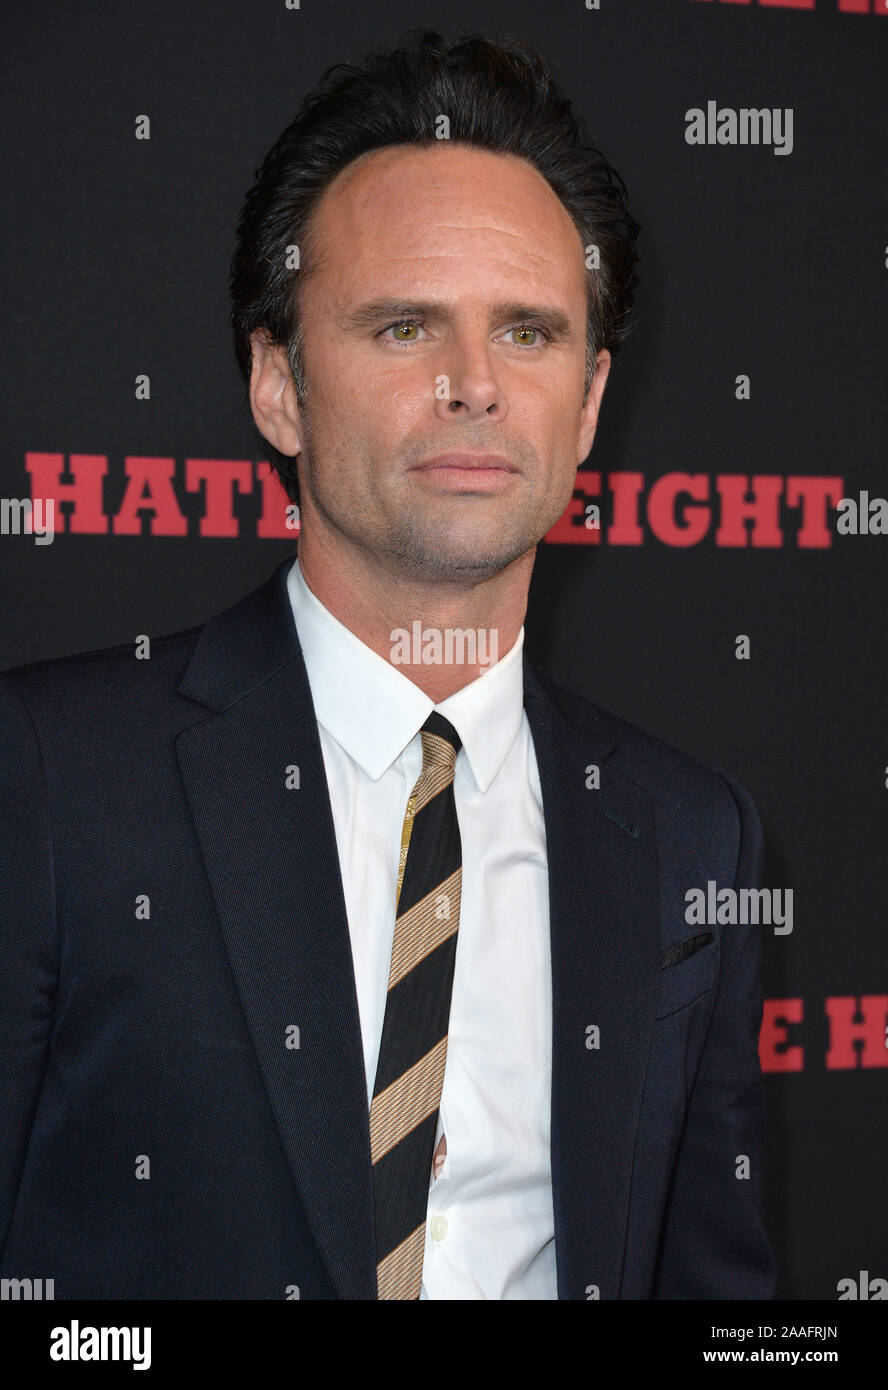 LOS ANGELES, CA - DECEMBER 7, 2015: Actor Walton Goggins at the premiere  "The Hateful Eight" © 2015 Paul Smith / Featureflash Stock Photo - Alamy